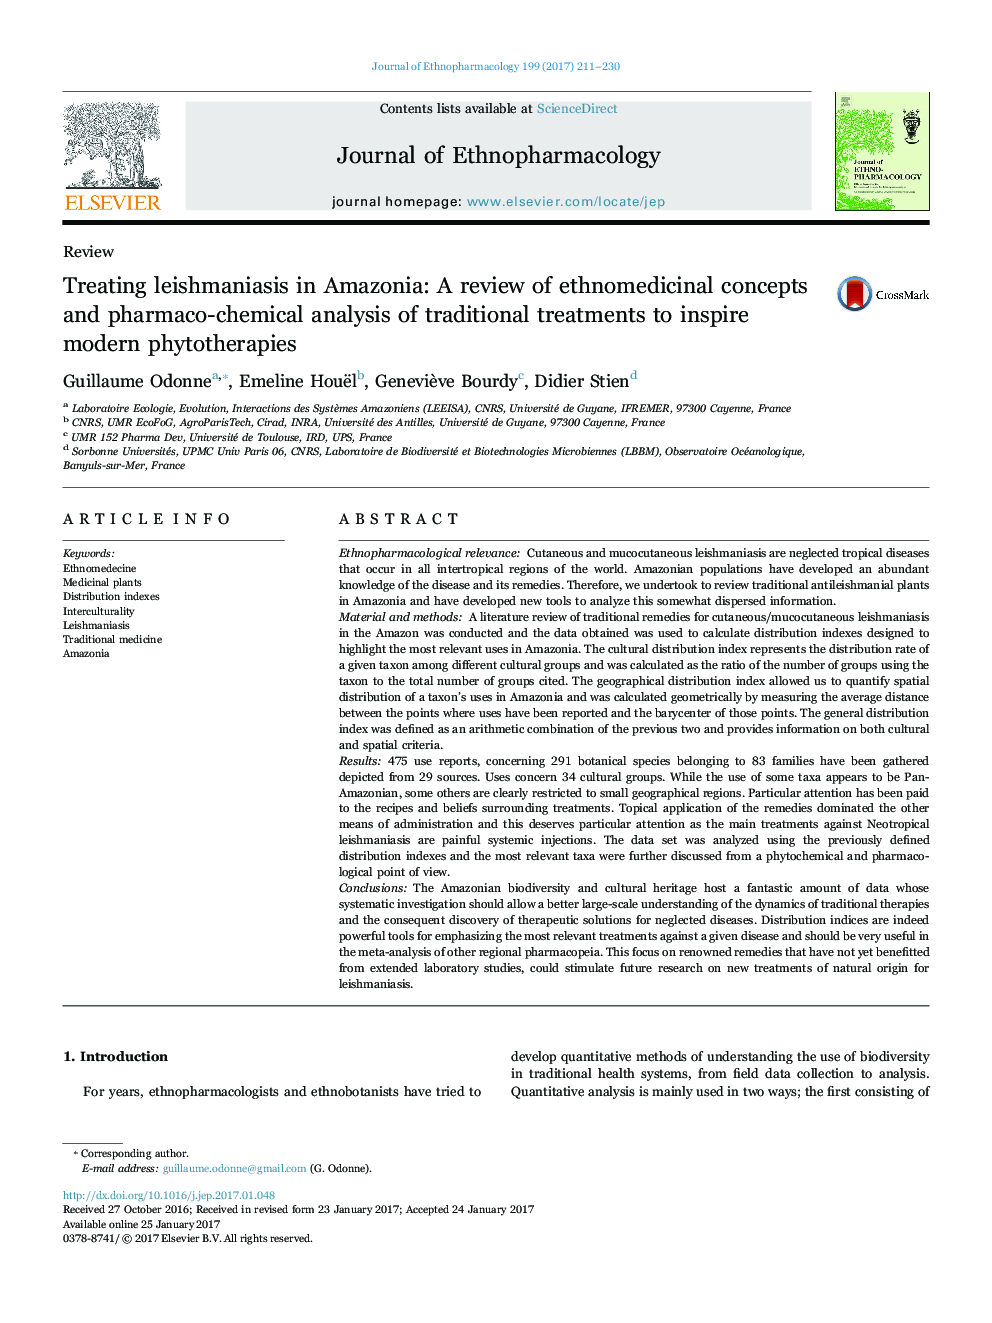 Treating leishmaniasis in Amazonia: A review of ethnomedicinal concepts and pharmaco-chemical analysis of traditional treatments to inspire modern phytotherapies